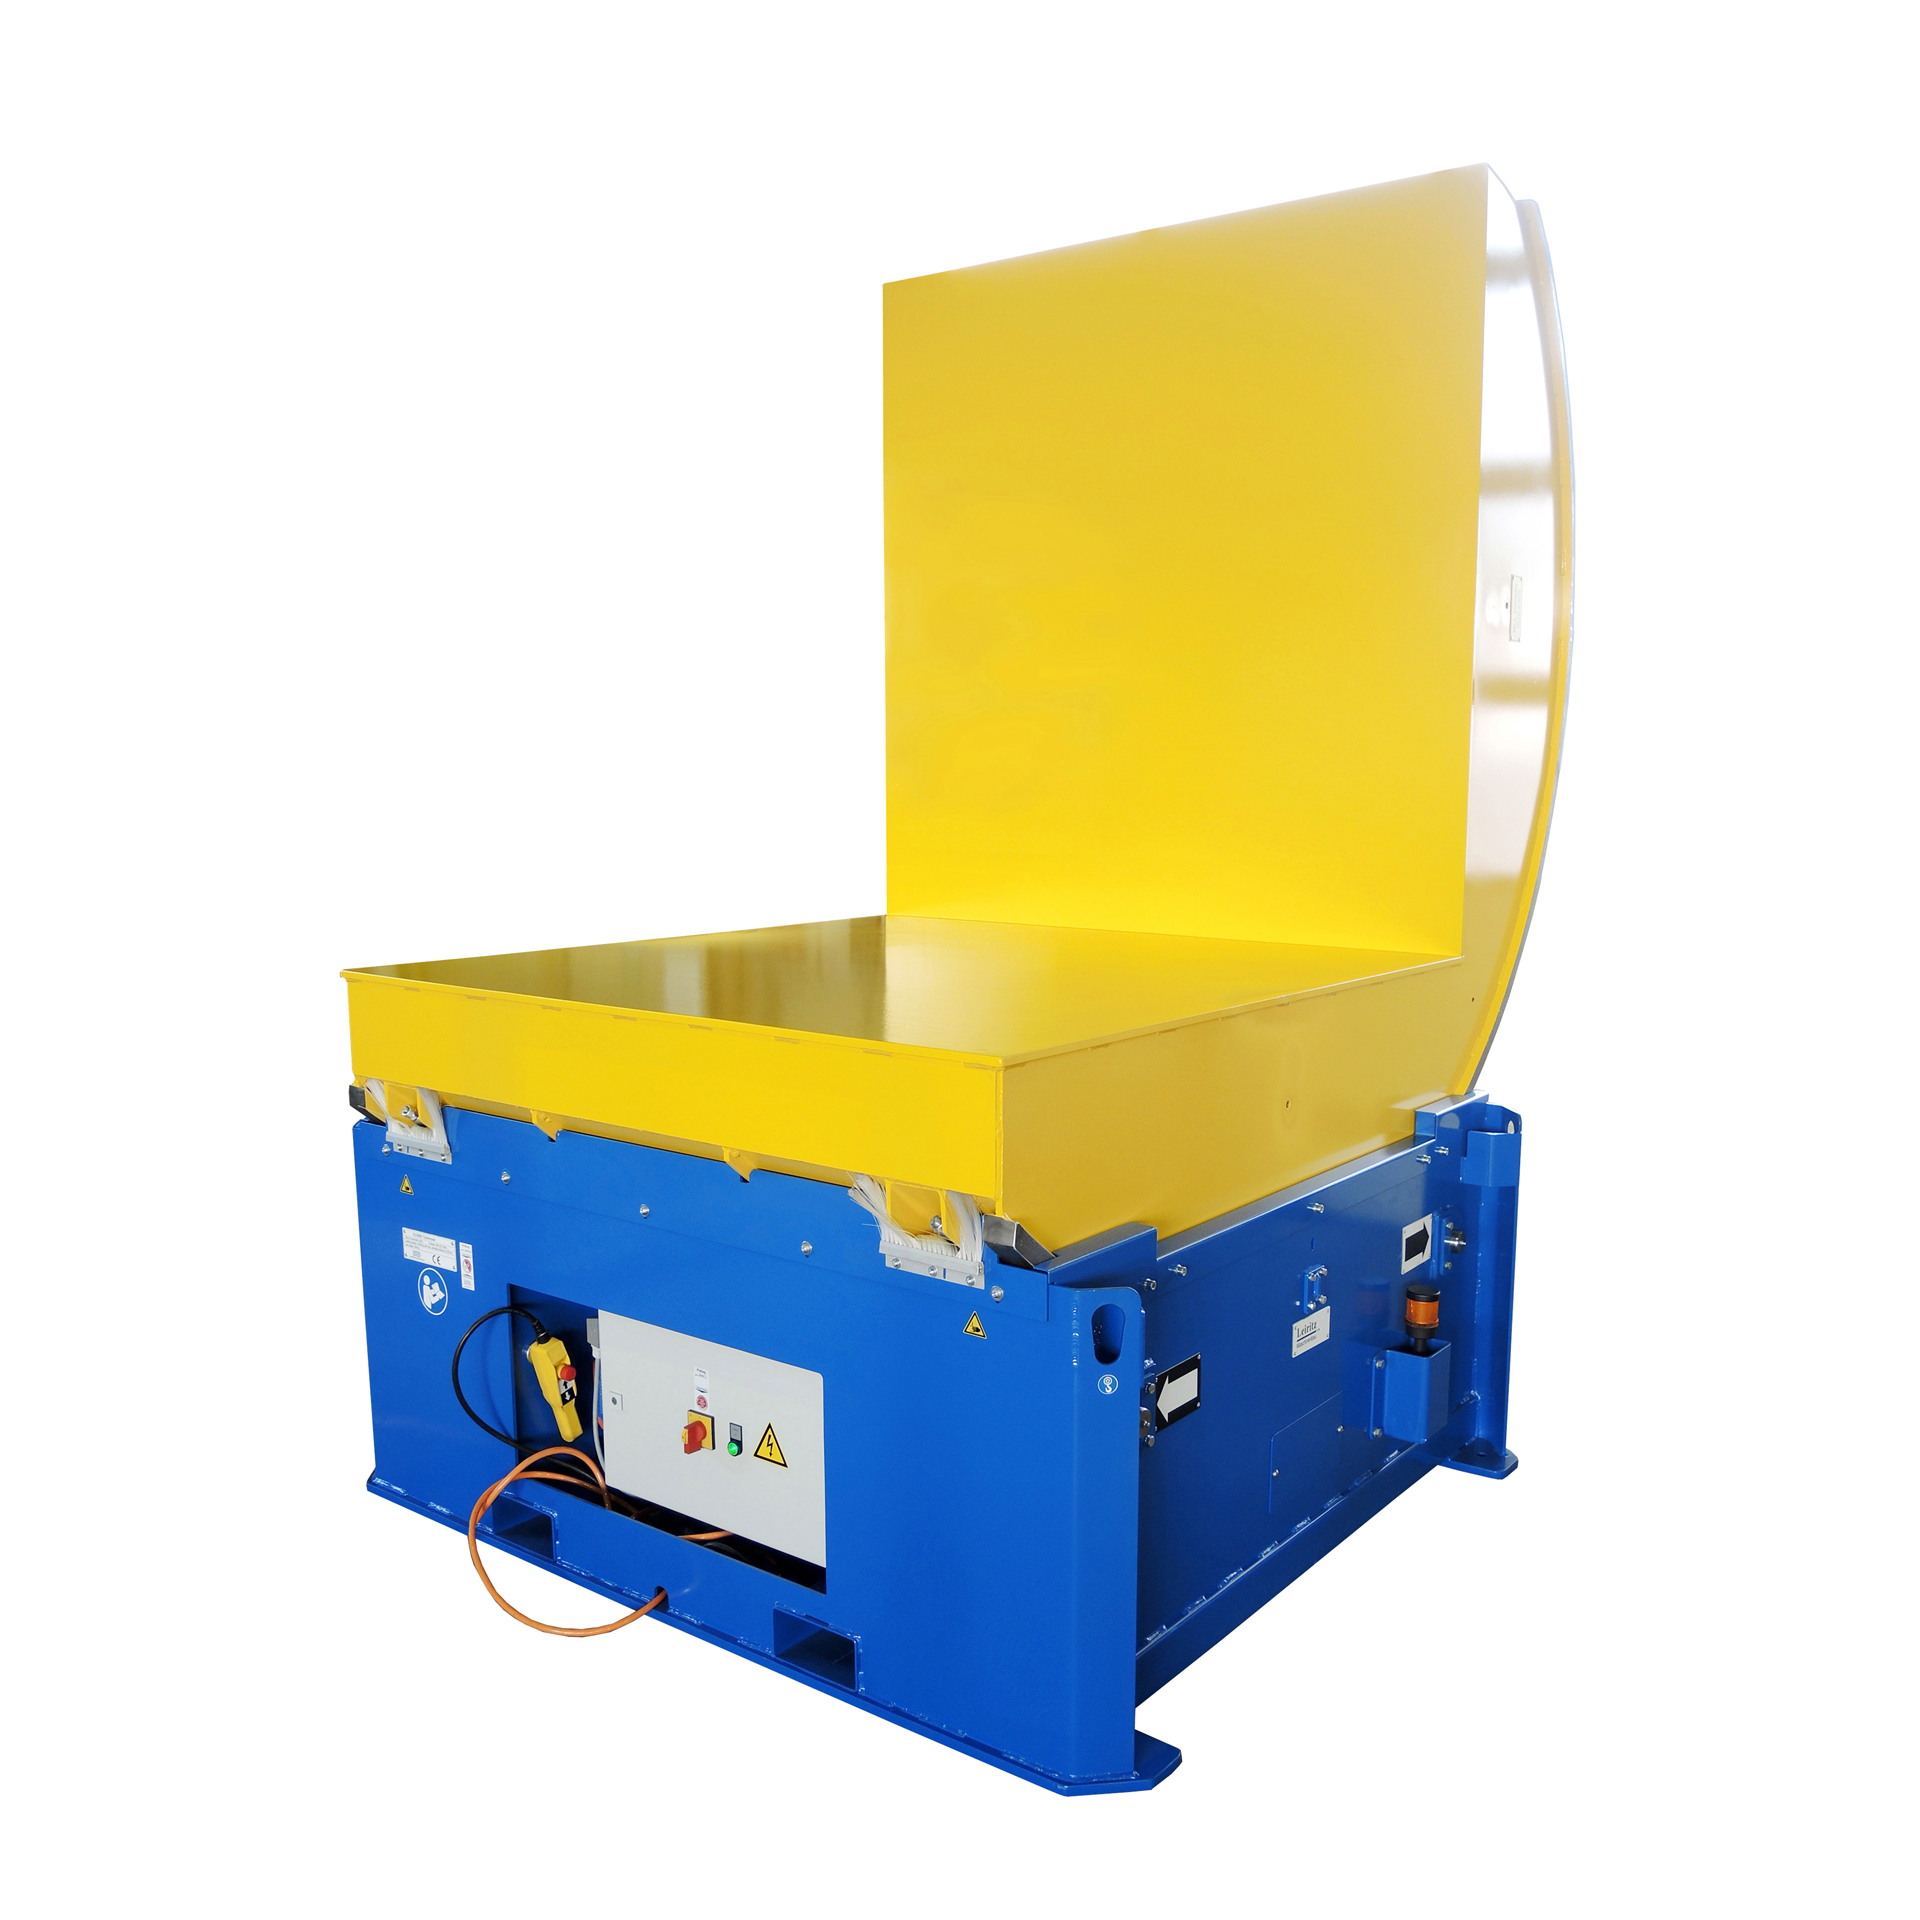 TOOL-MOVER / Turnover Device in yellow-blue standard version.